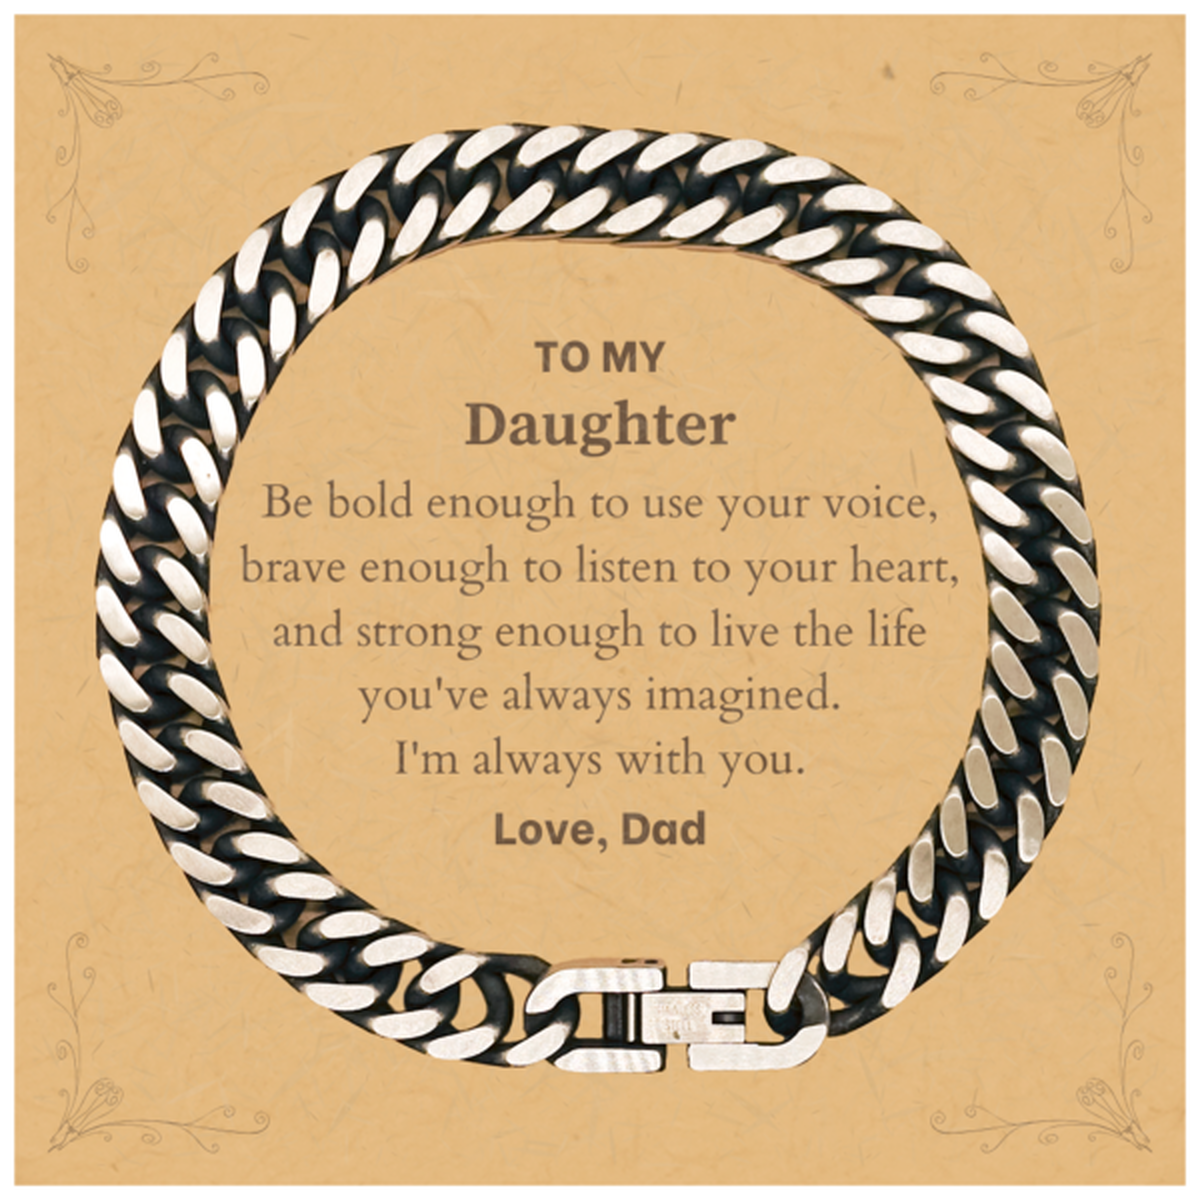 Keepsake Daughter Cuban Link Chain Bracelet Gift Idea Graduation Christmas Birthday Daughter from Dad, Daughter Be bold enough to use your voice, brave enough to listen to your heart. Love, Dad